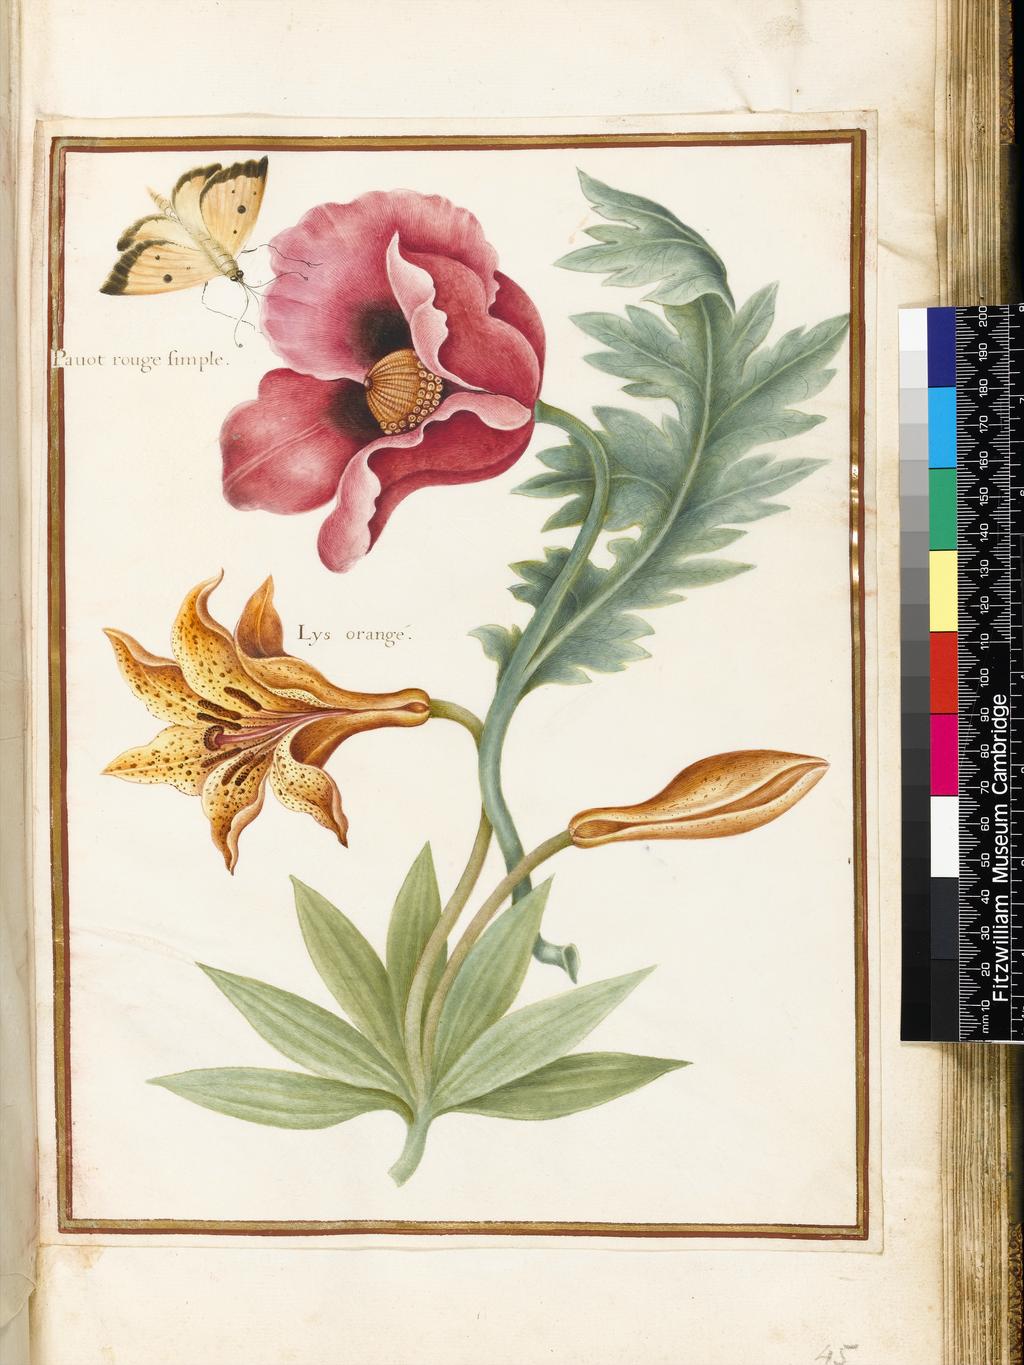 An image of Stylized study of Papaver Somniferum (Opium poppy) and Lilium and a moth. Robert, Nicolas attributed to (French, 1614-1685). Watercolour and bodycolour on vellum, height 317 mm, width 234 mm. Album containing 62 botanical drawings on vellum tipped in on the gilt-edged pages of the album which bear the watermark of an 18th century French paper-maker, Malmenayde of Thiers (active from 1731). Bound in red morocco with clasps, the spine tooled in gilt. The Pages are interleaved with thin protective paper. Ruled lines of red and gold border the drawings on all sides. 17th Century.